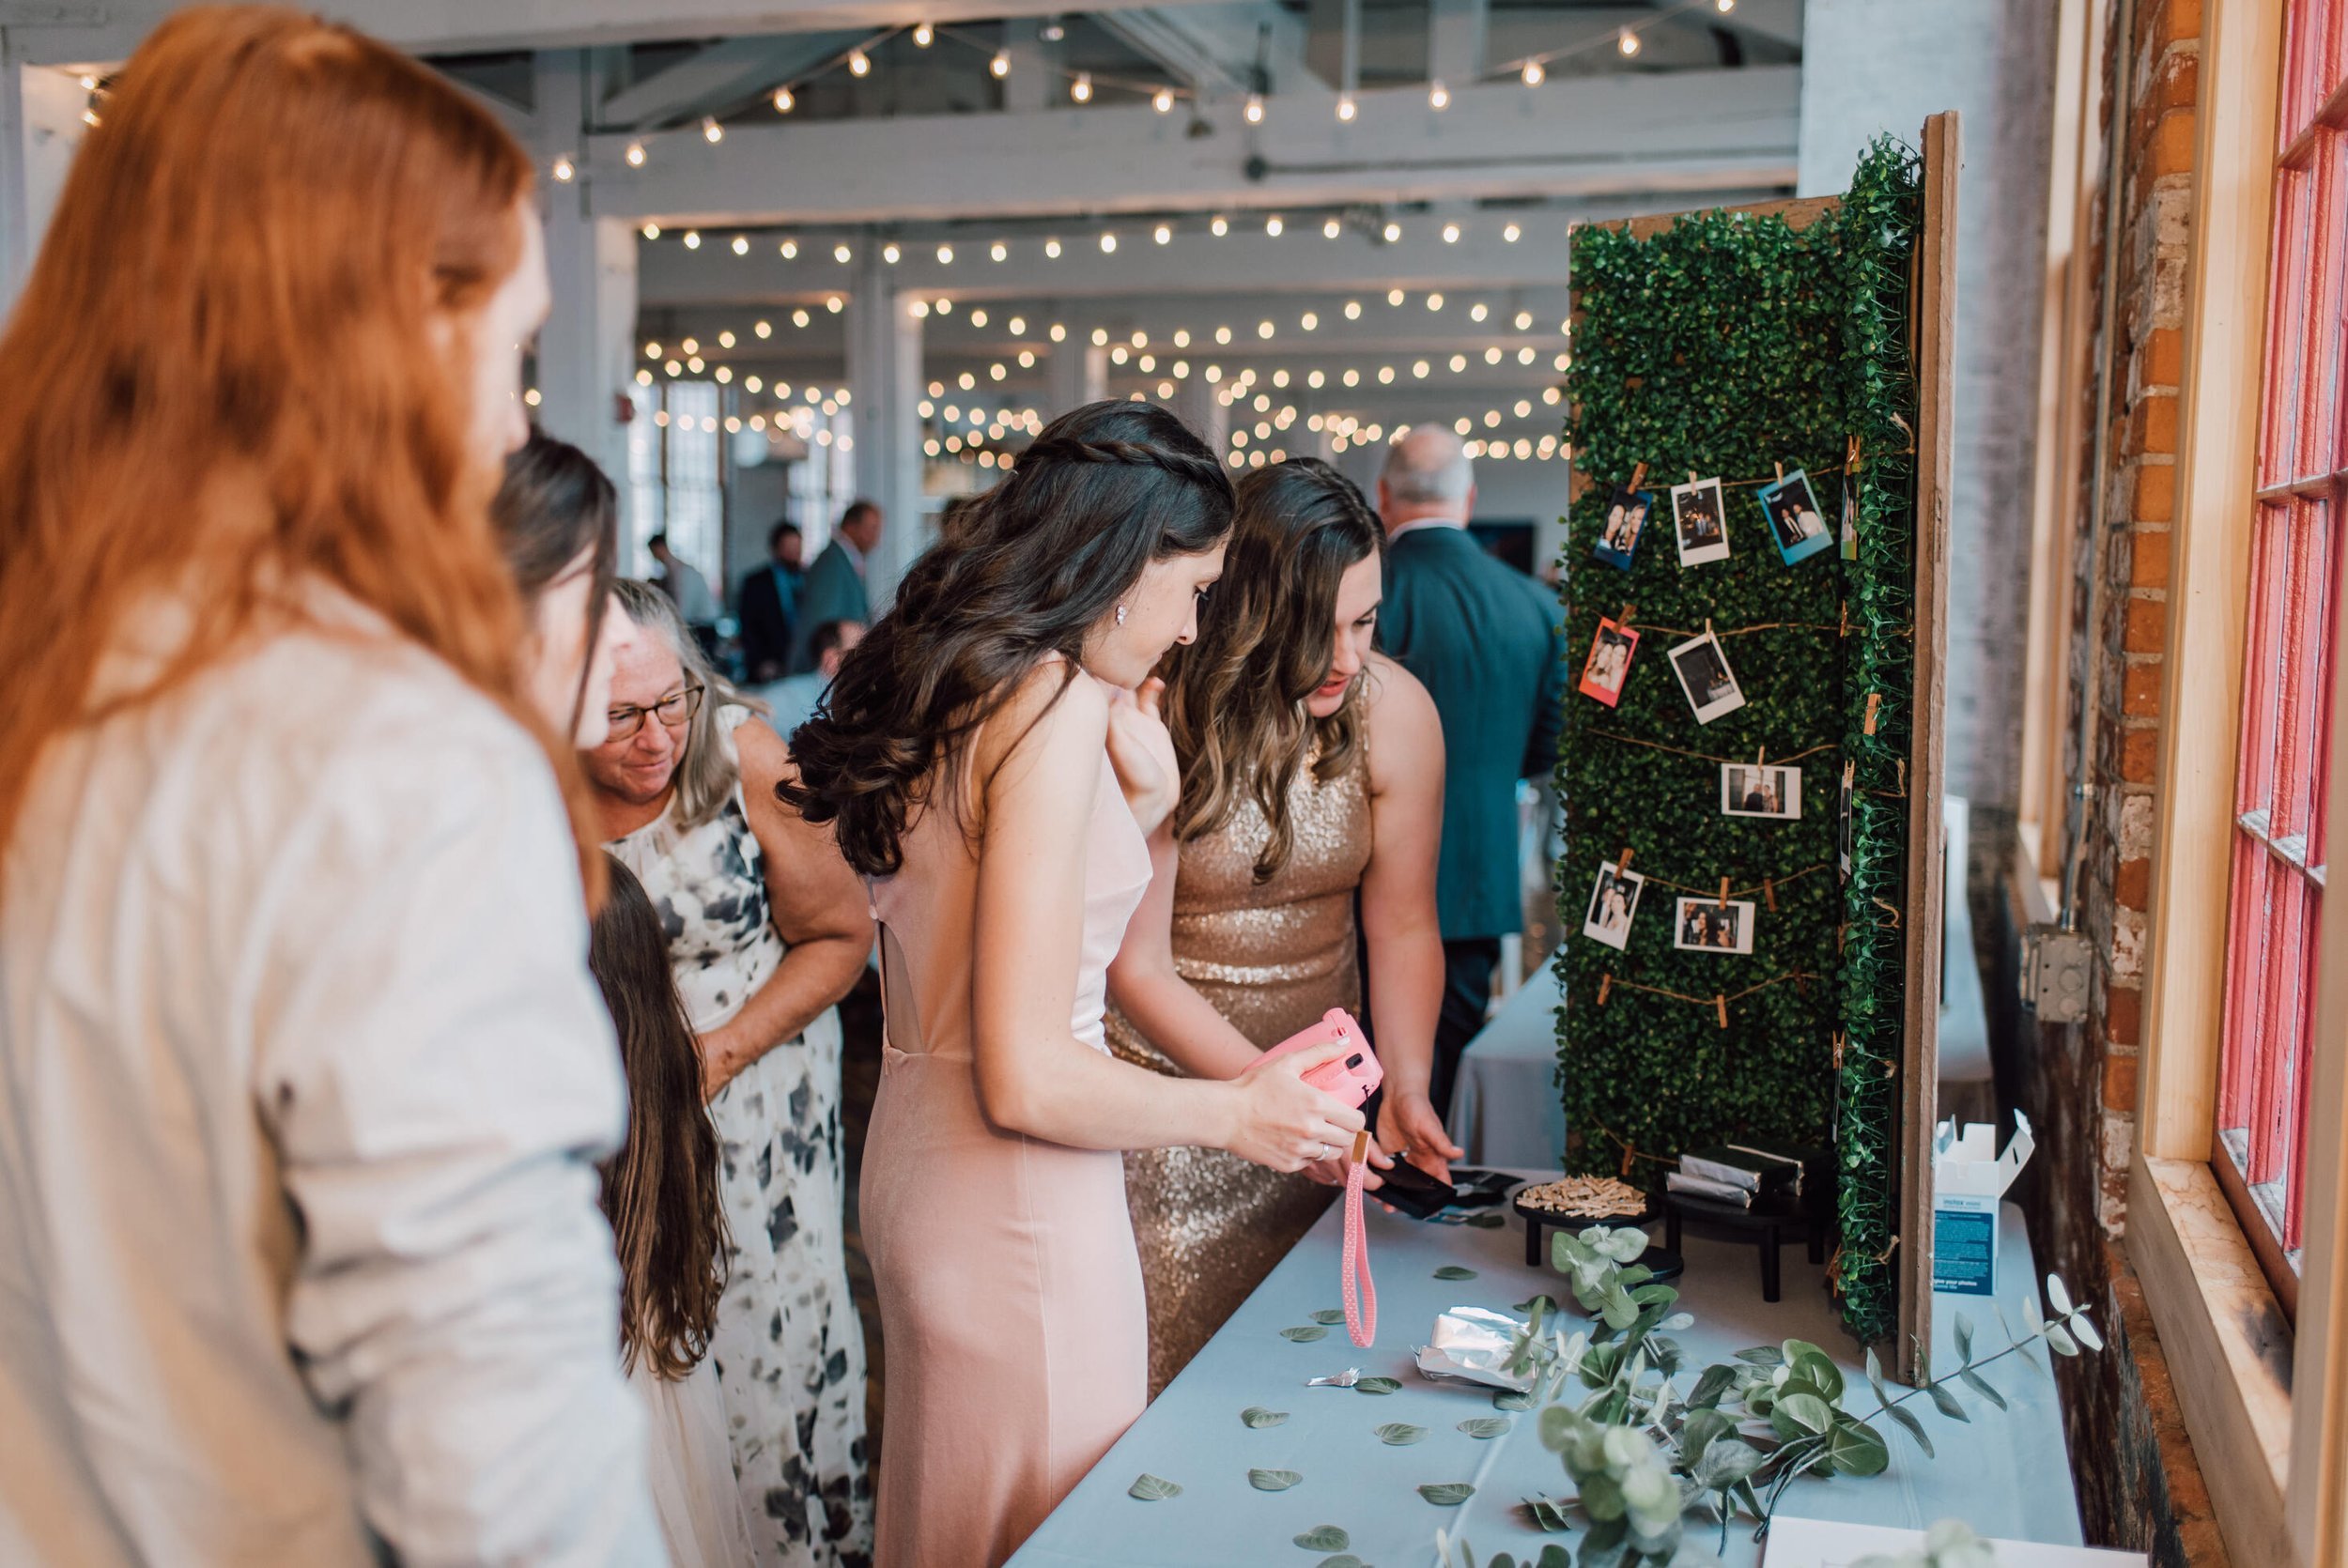  Guests fill out the Polaroid guestbook at a cracker factory wedding&nbsp; 